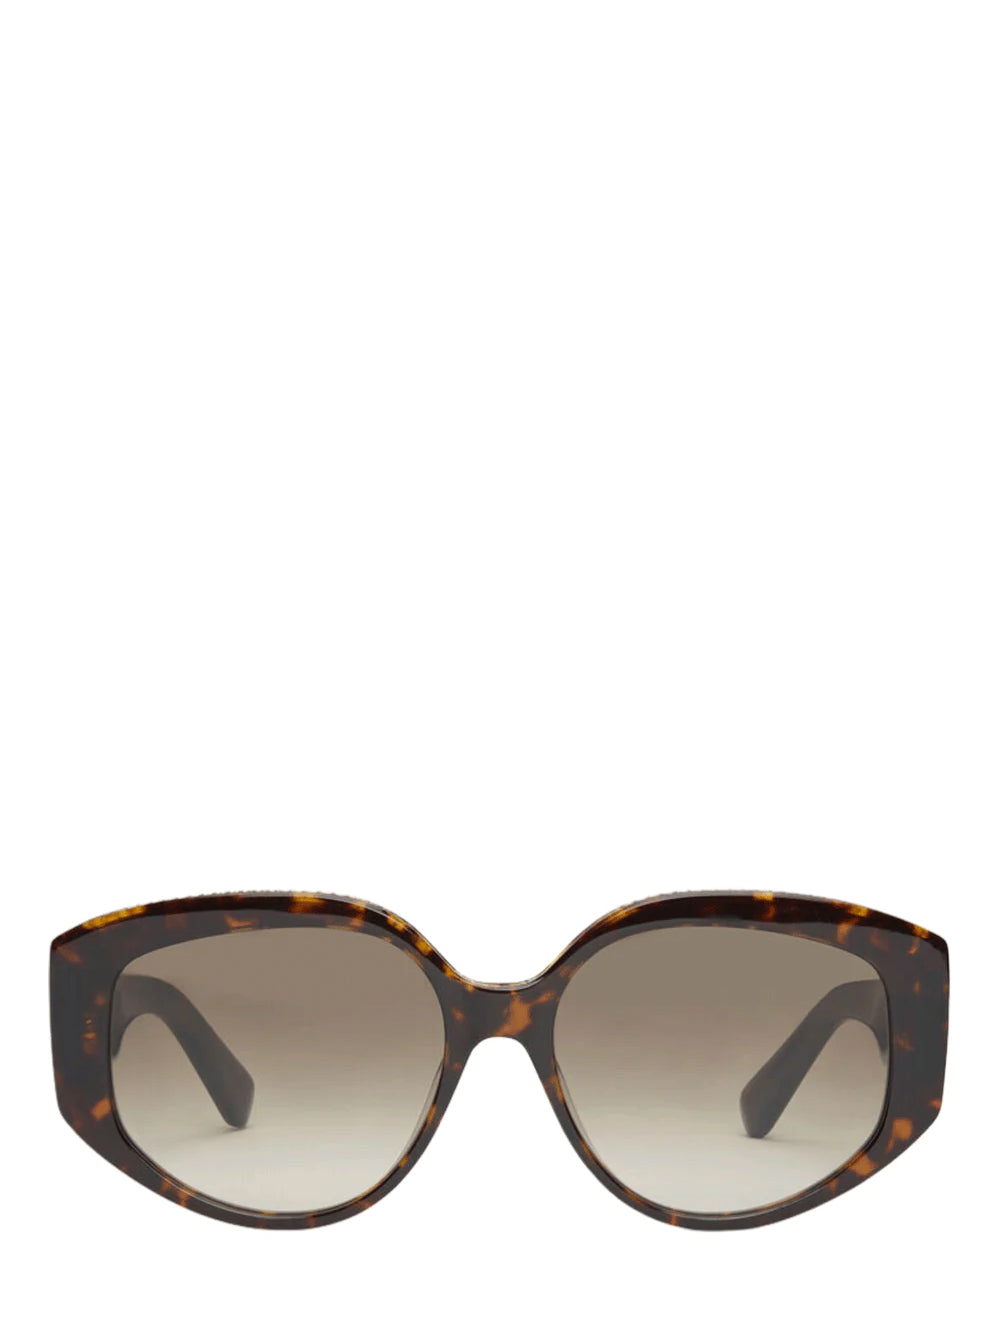 Oval Sunglasses (Brown)